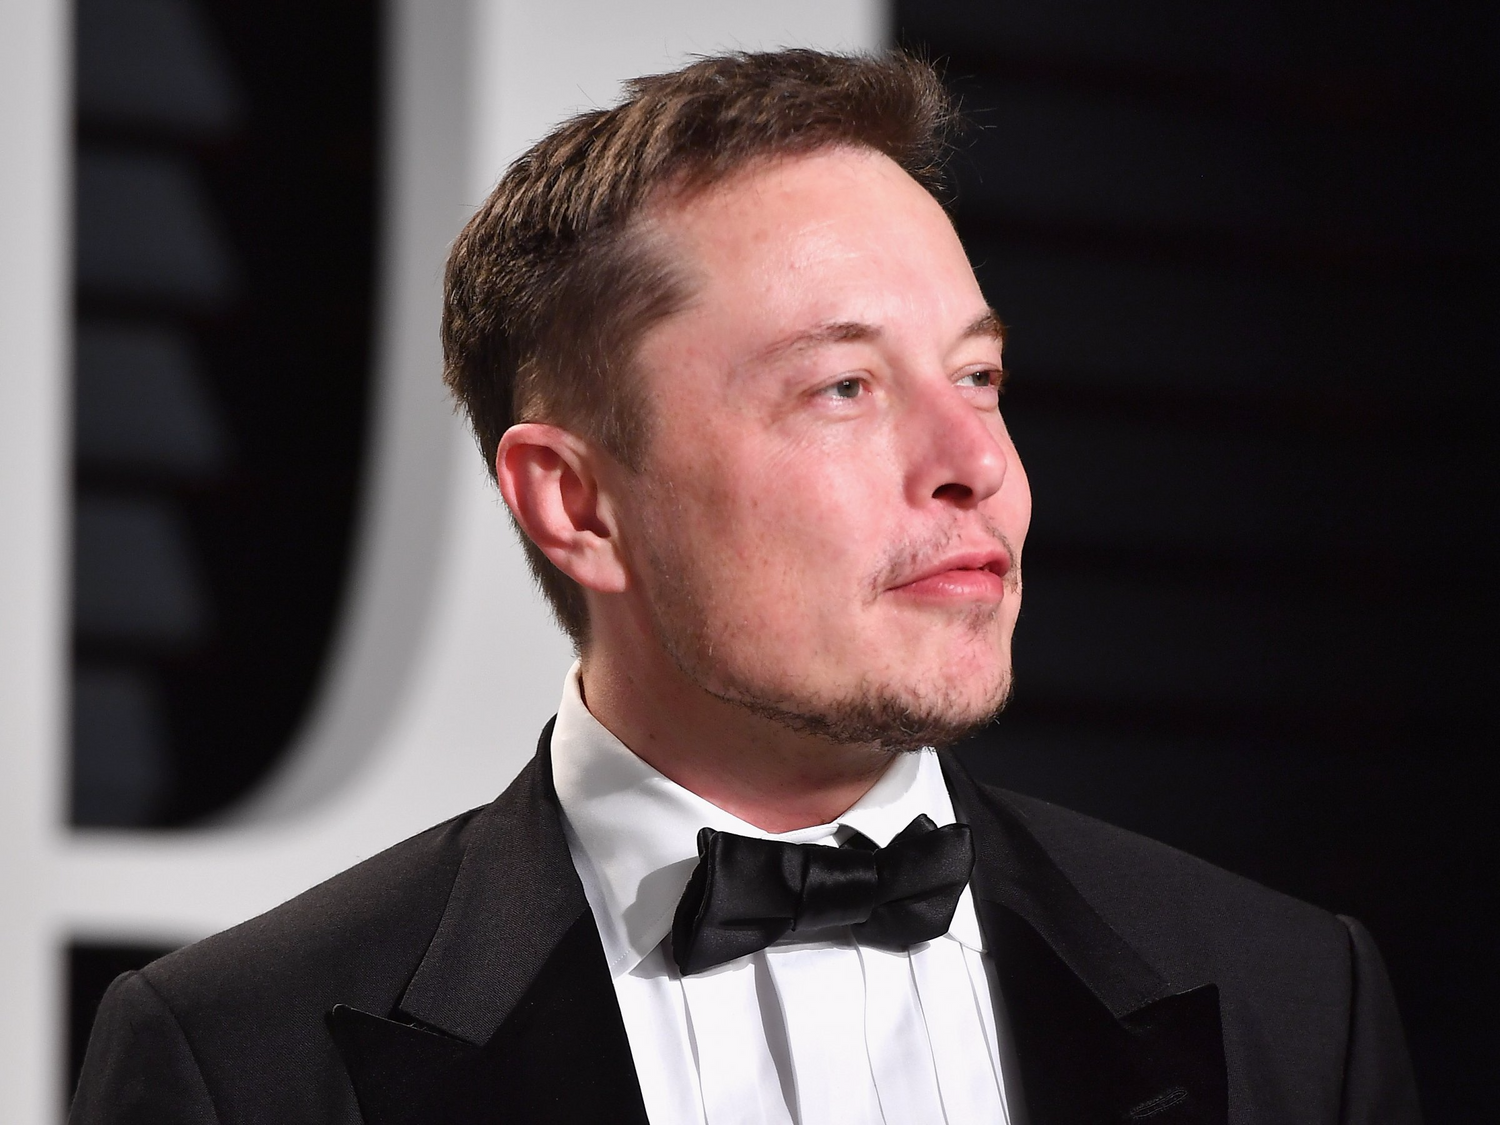 Tesla CEO Elon Musk is on Barron’s 25 Top CEOs, Who Took on Extraordinary Challenges During 2020